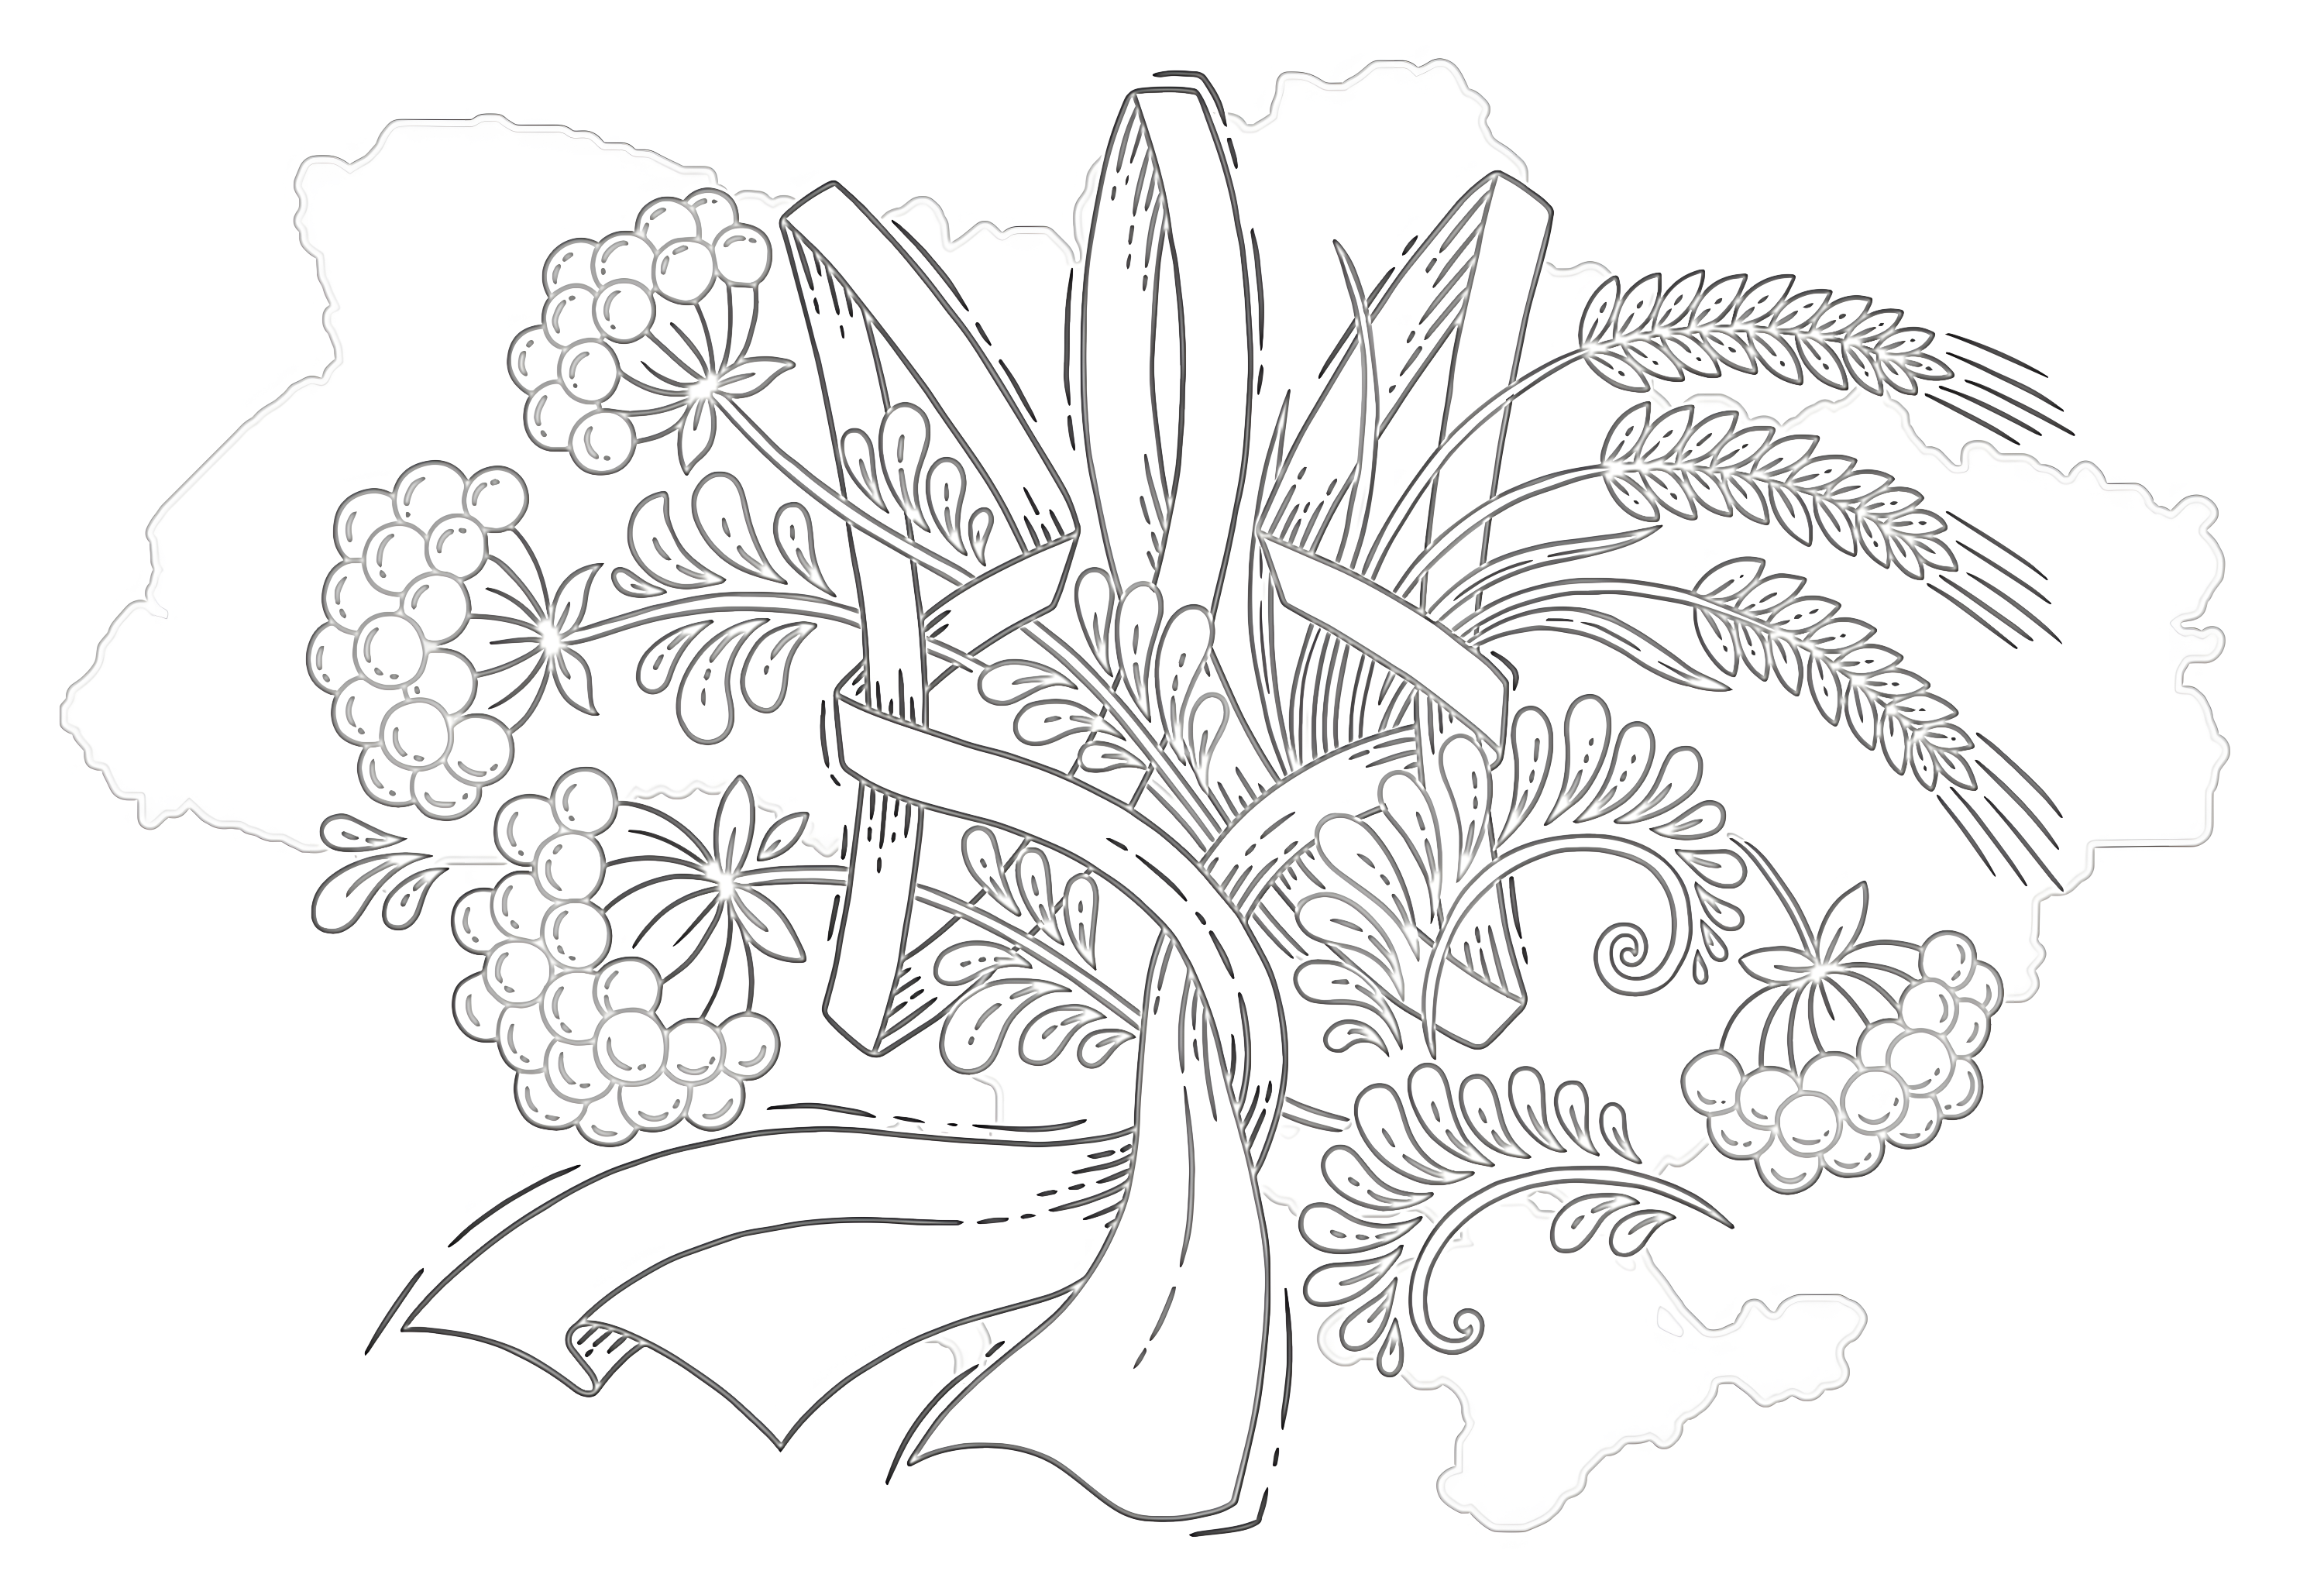 State Symbol Of Ukraine Trident - Coloring page